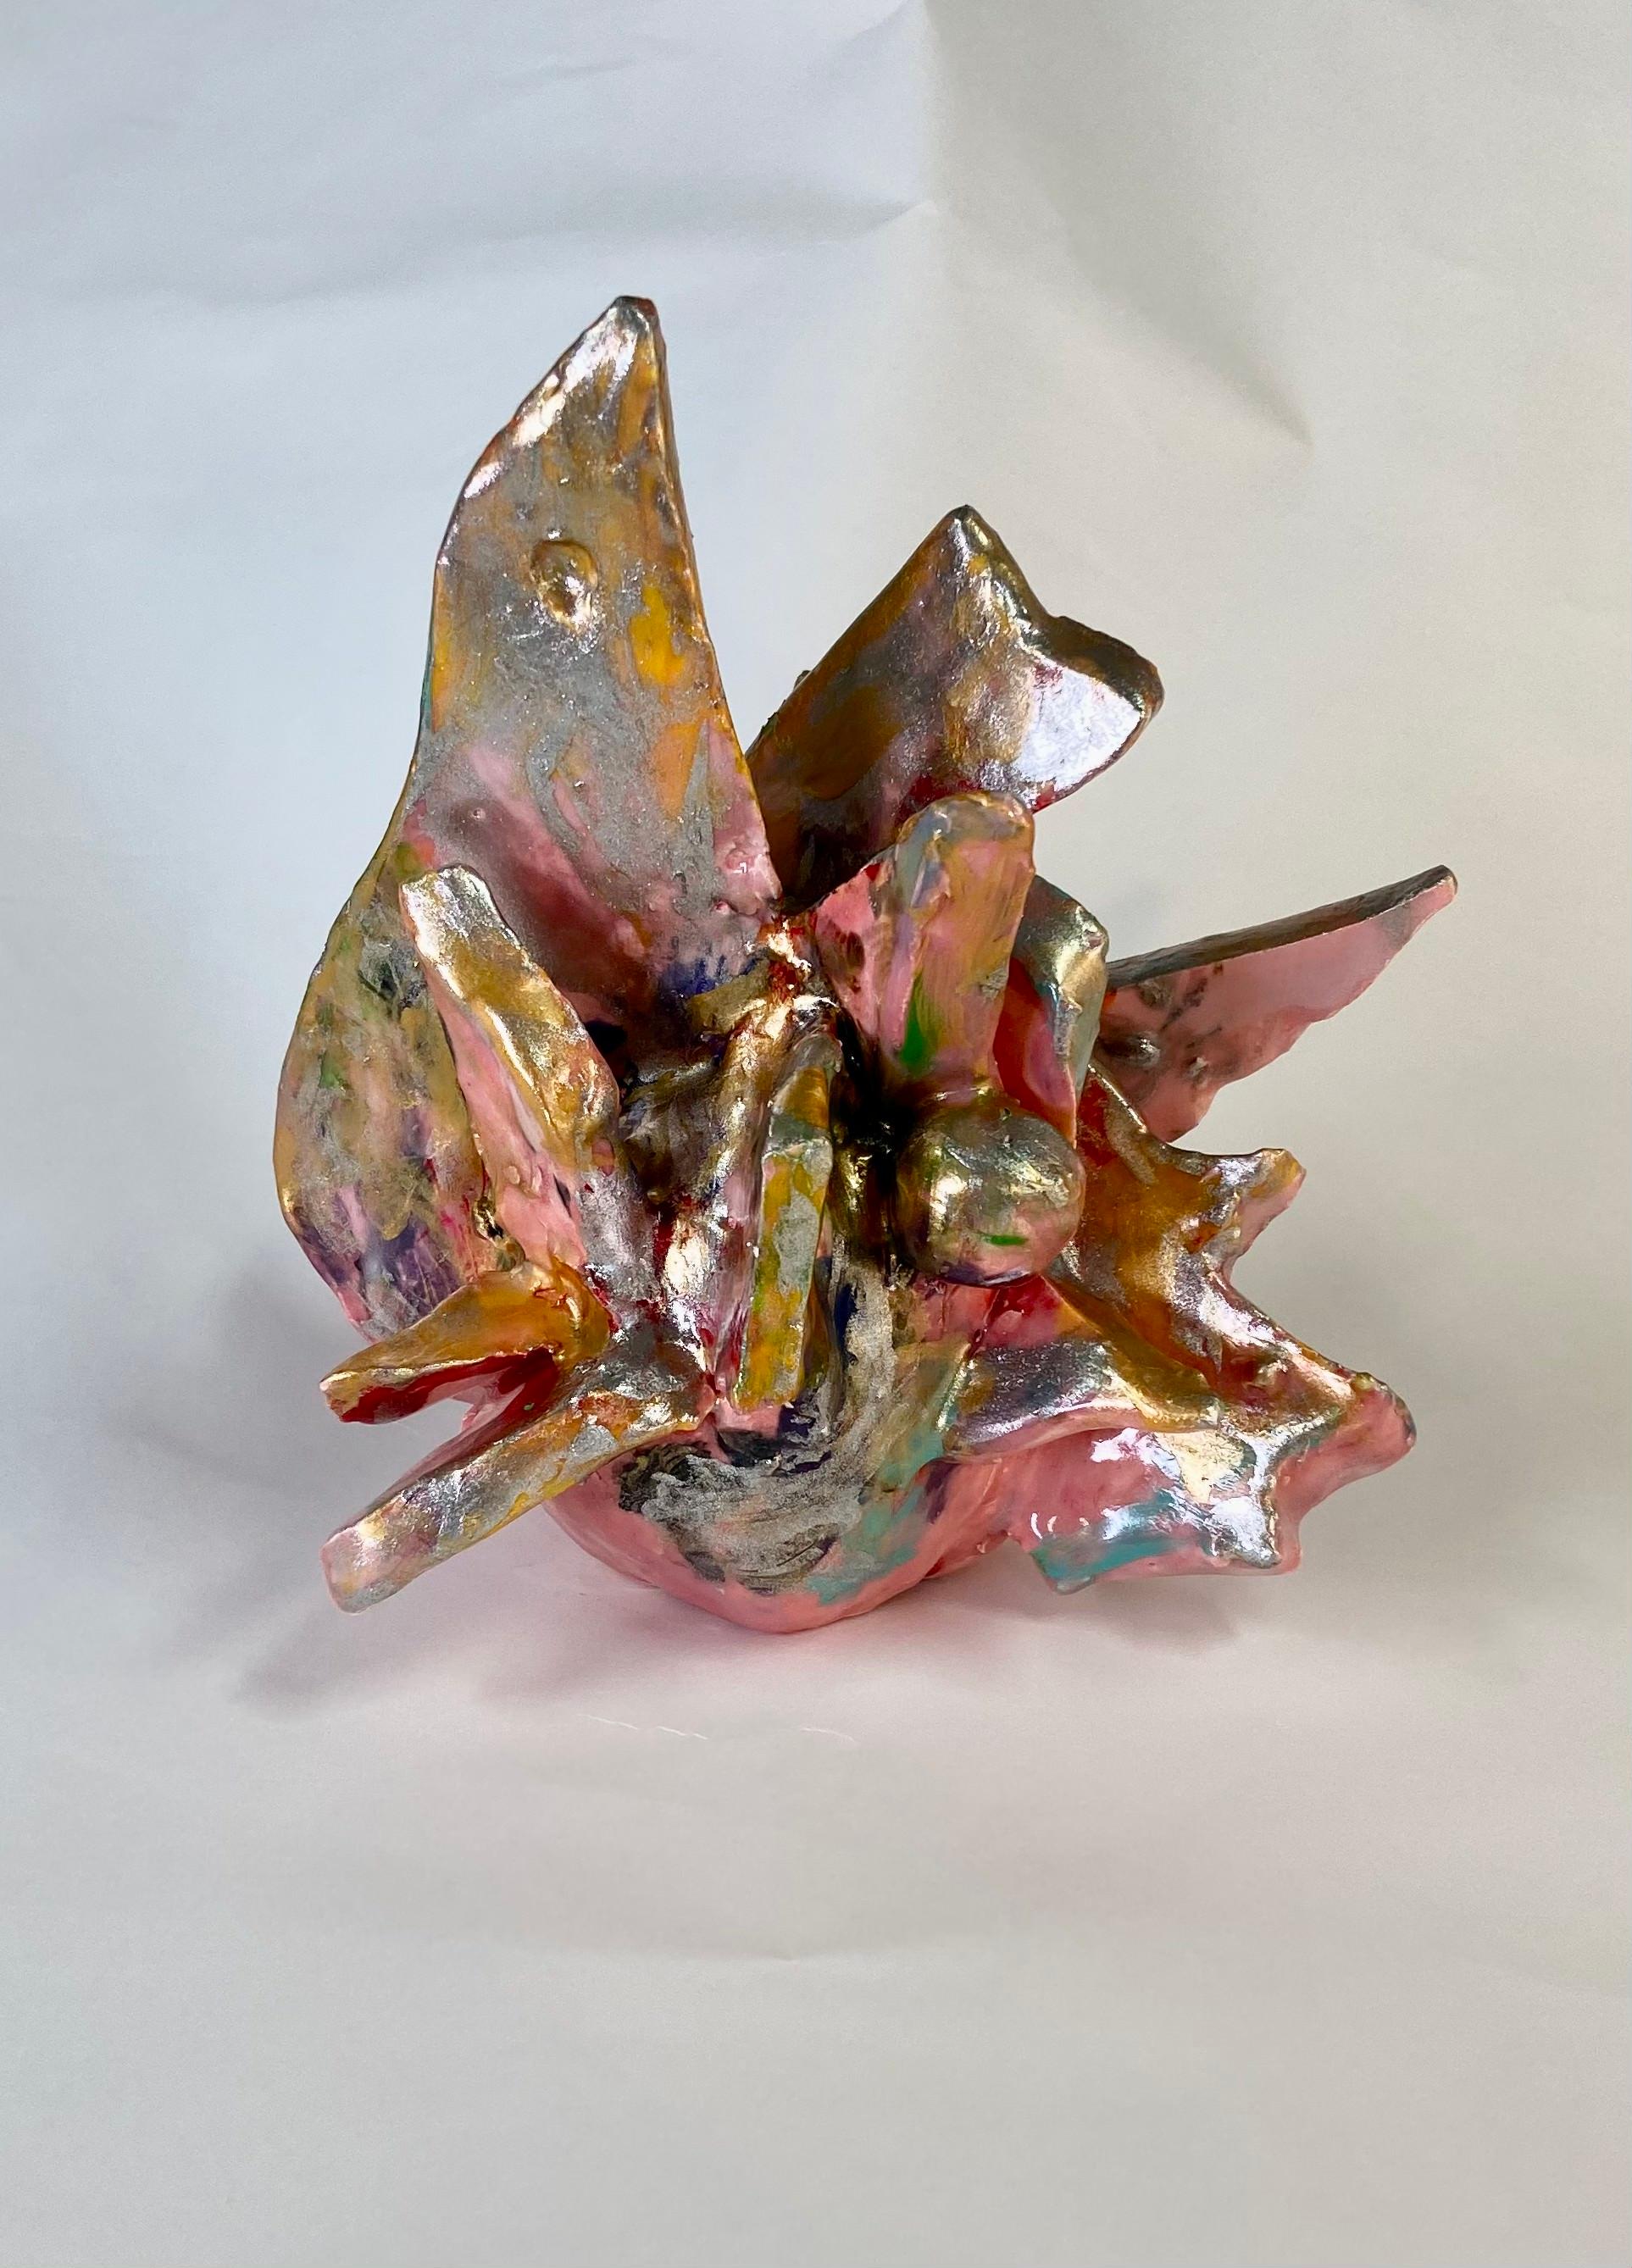 Every which way, by Charo Oquet
Glazed ceramic and enamel
6.5” x 6” x 4.5”
2019

These gravity-defying ceramics stacked constructions struggle to soar beyond the boundaries of the spaces that contain them, often appearing to teeter in the brink of